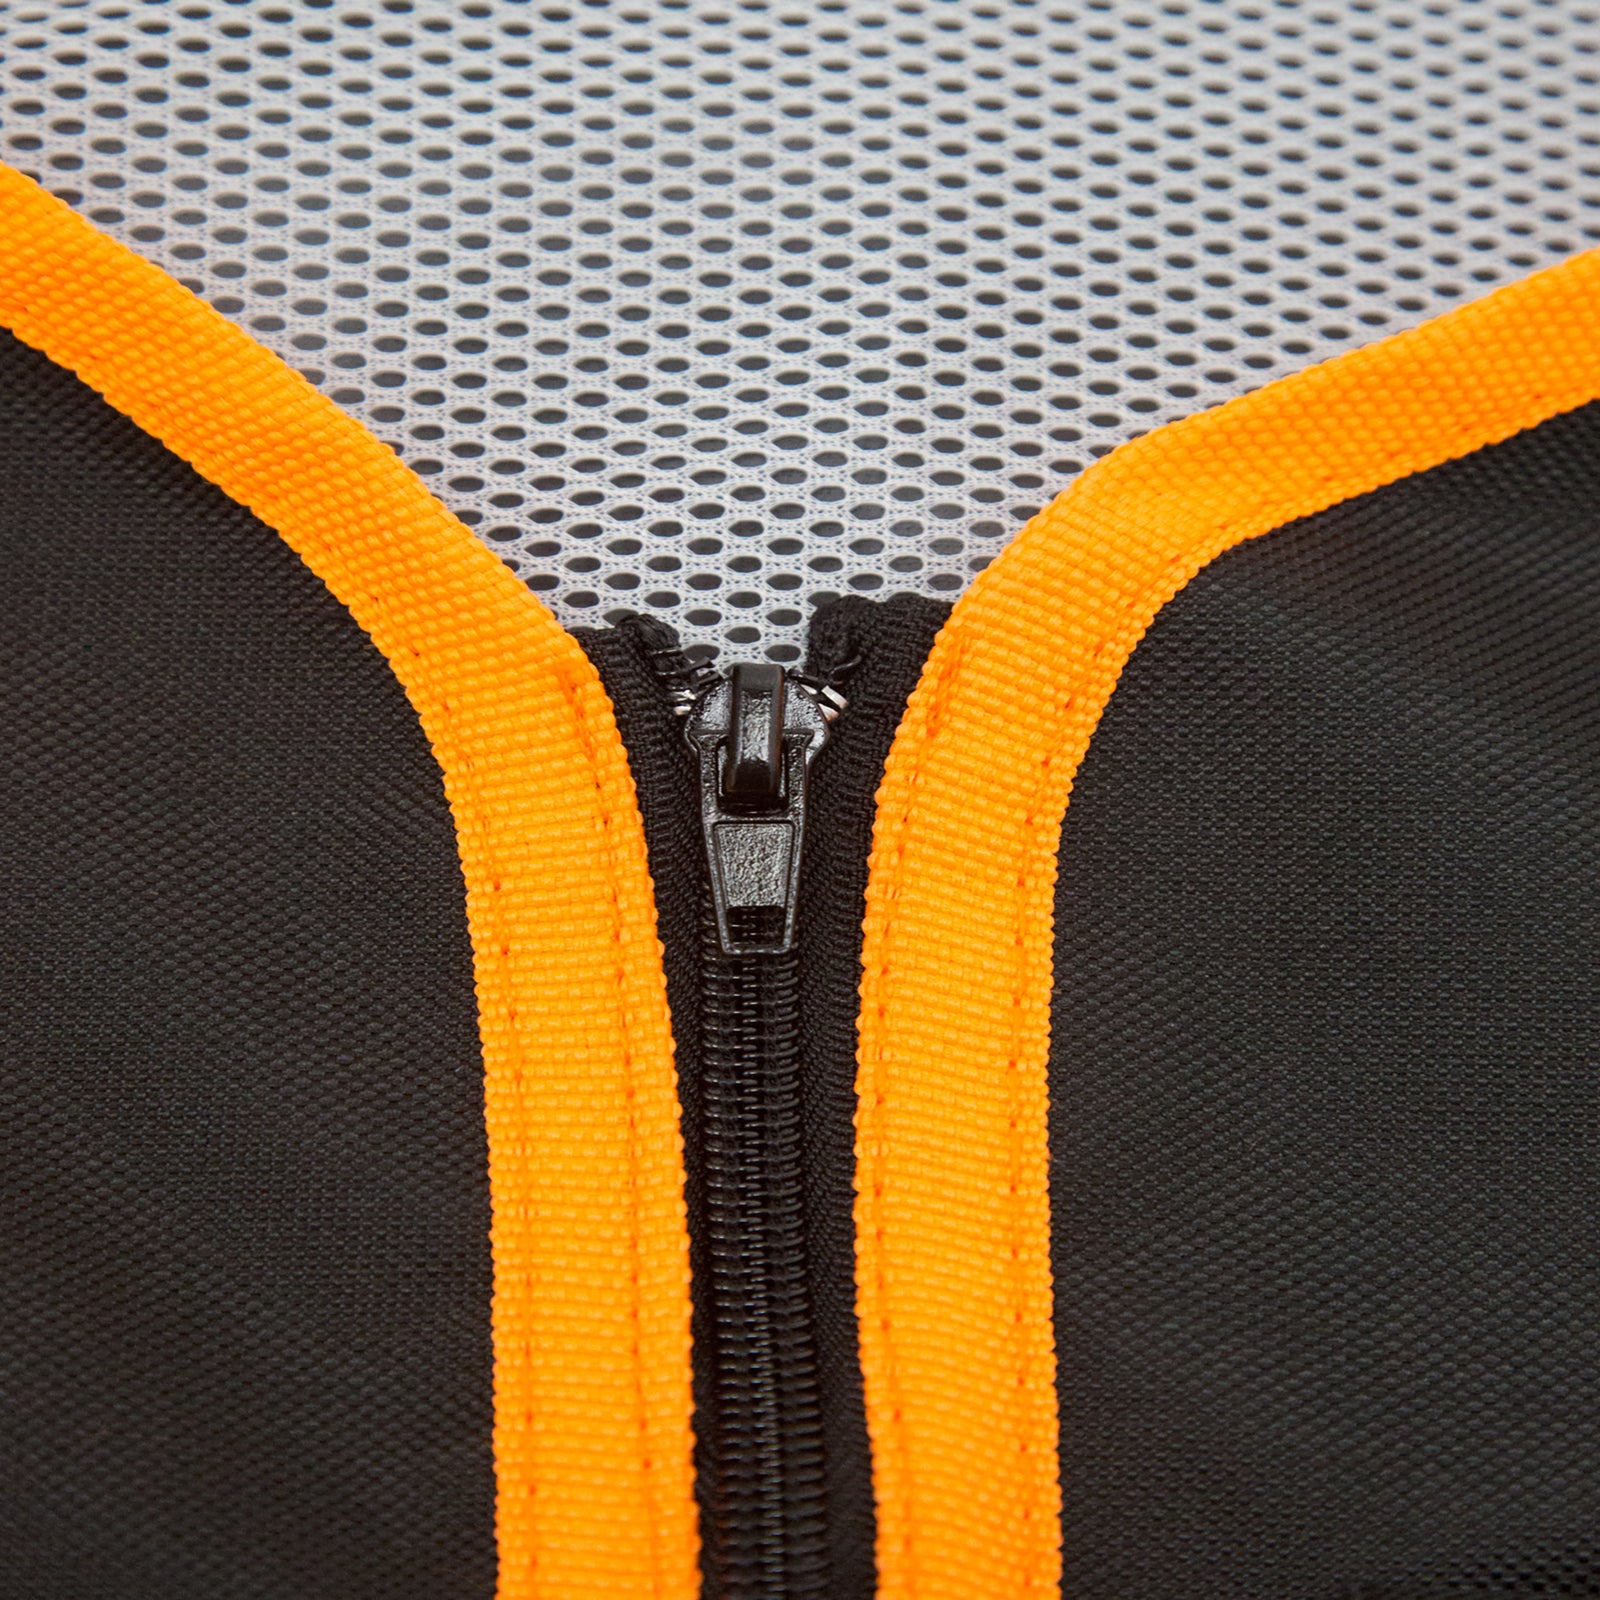 Close up shows the zipper and the mesh liner of the tool vest